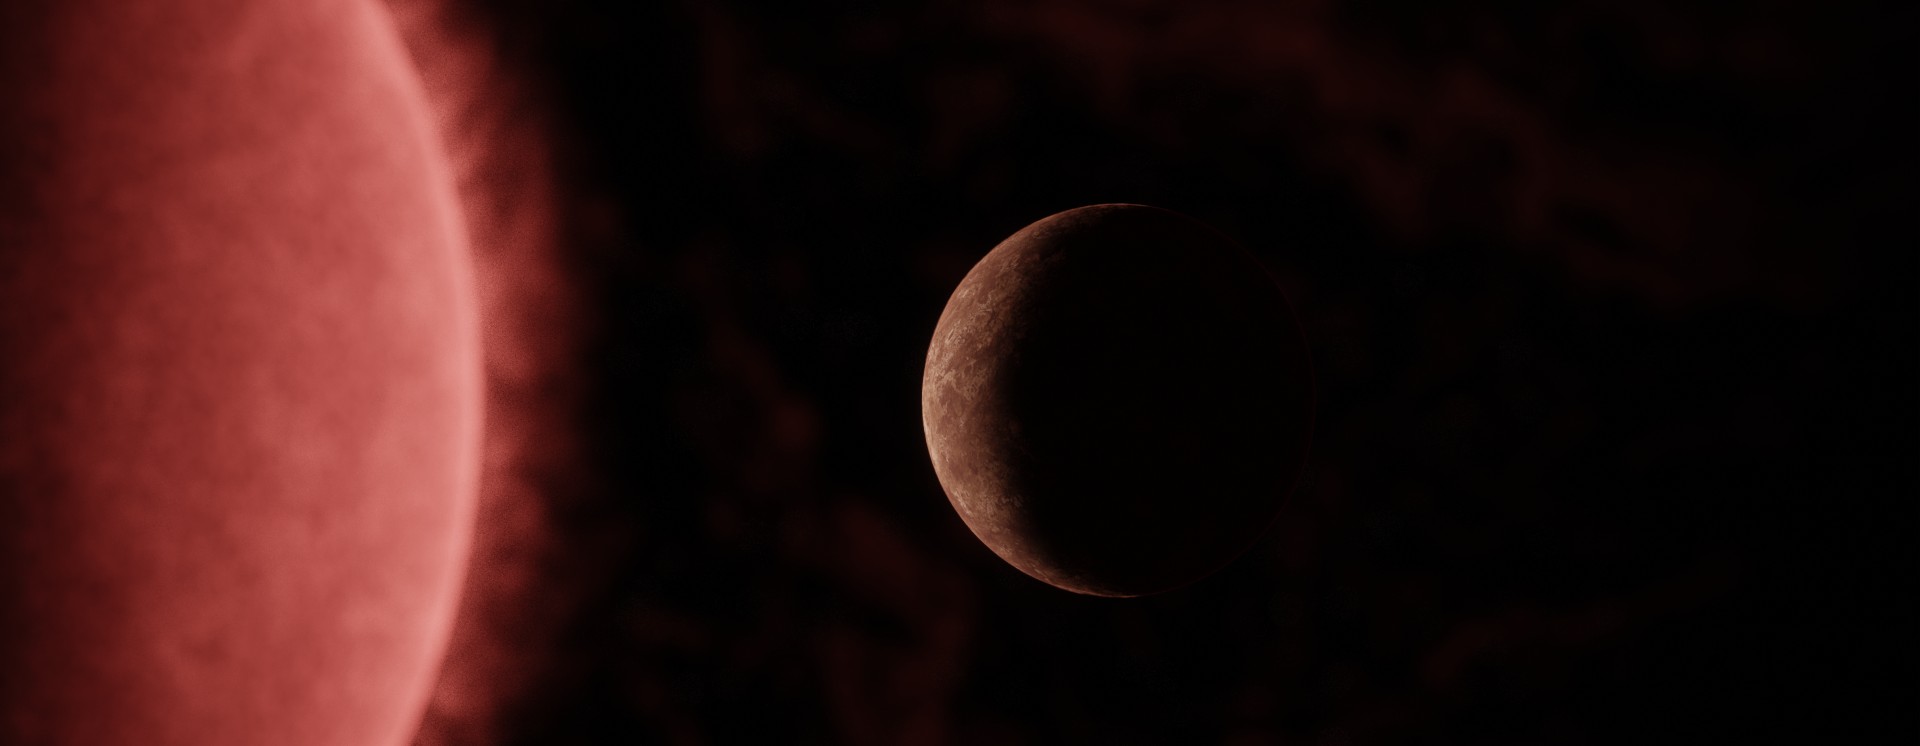 Generated image of the exoplanet and the red dwarf star